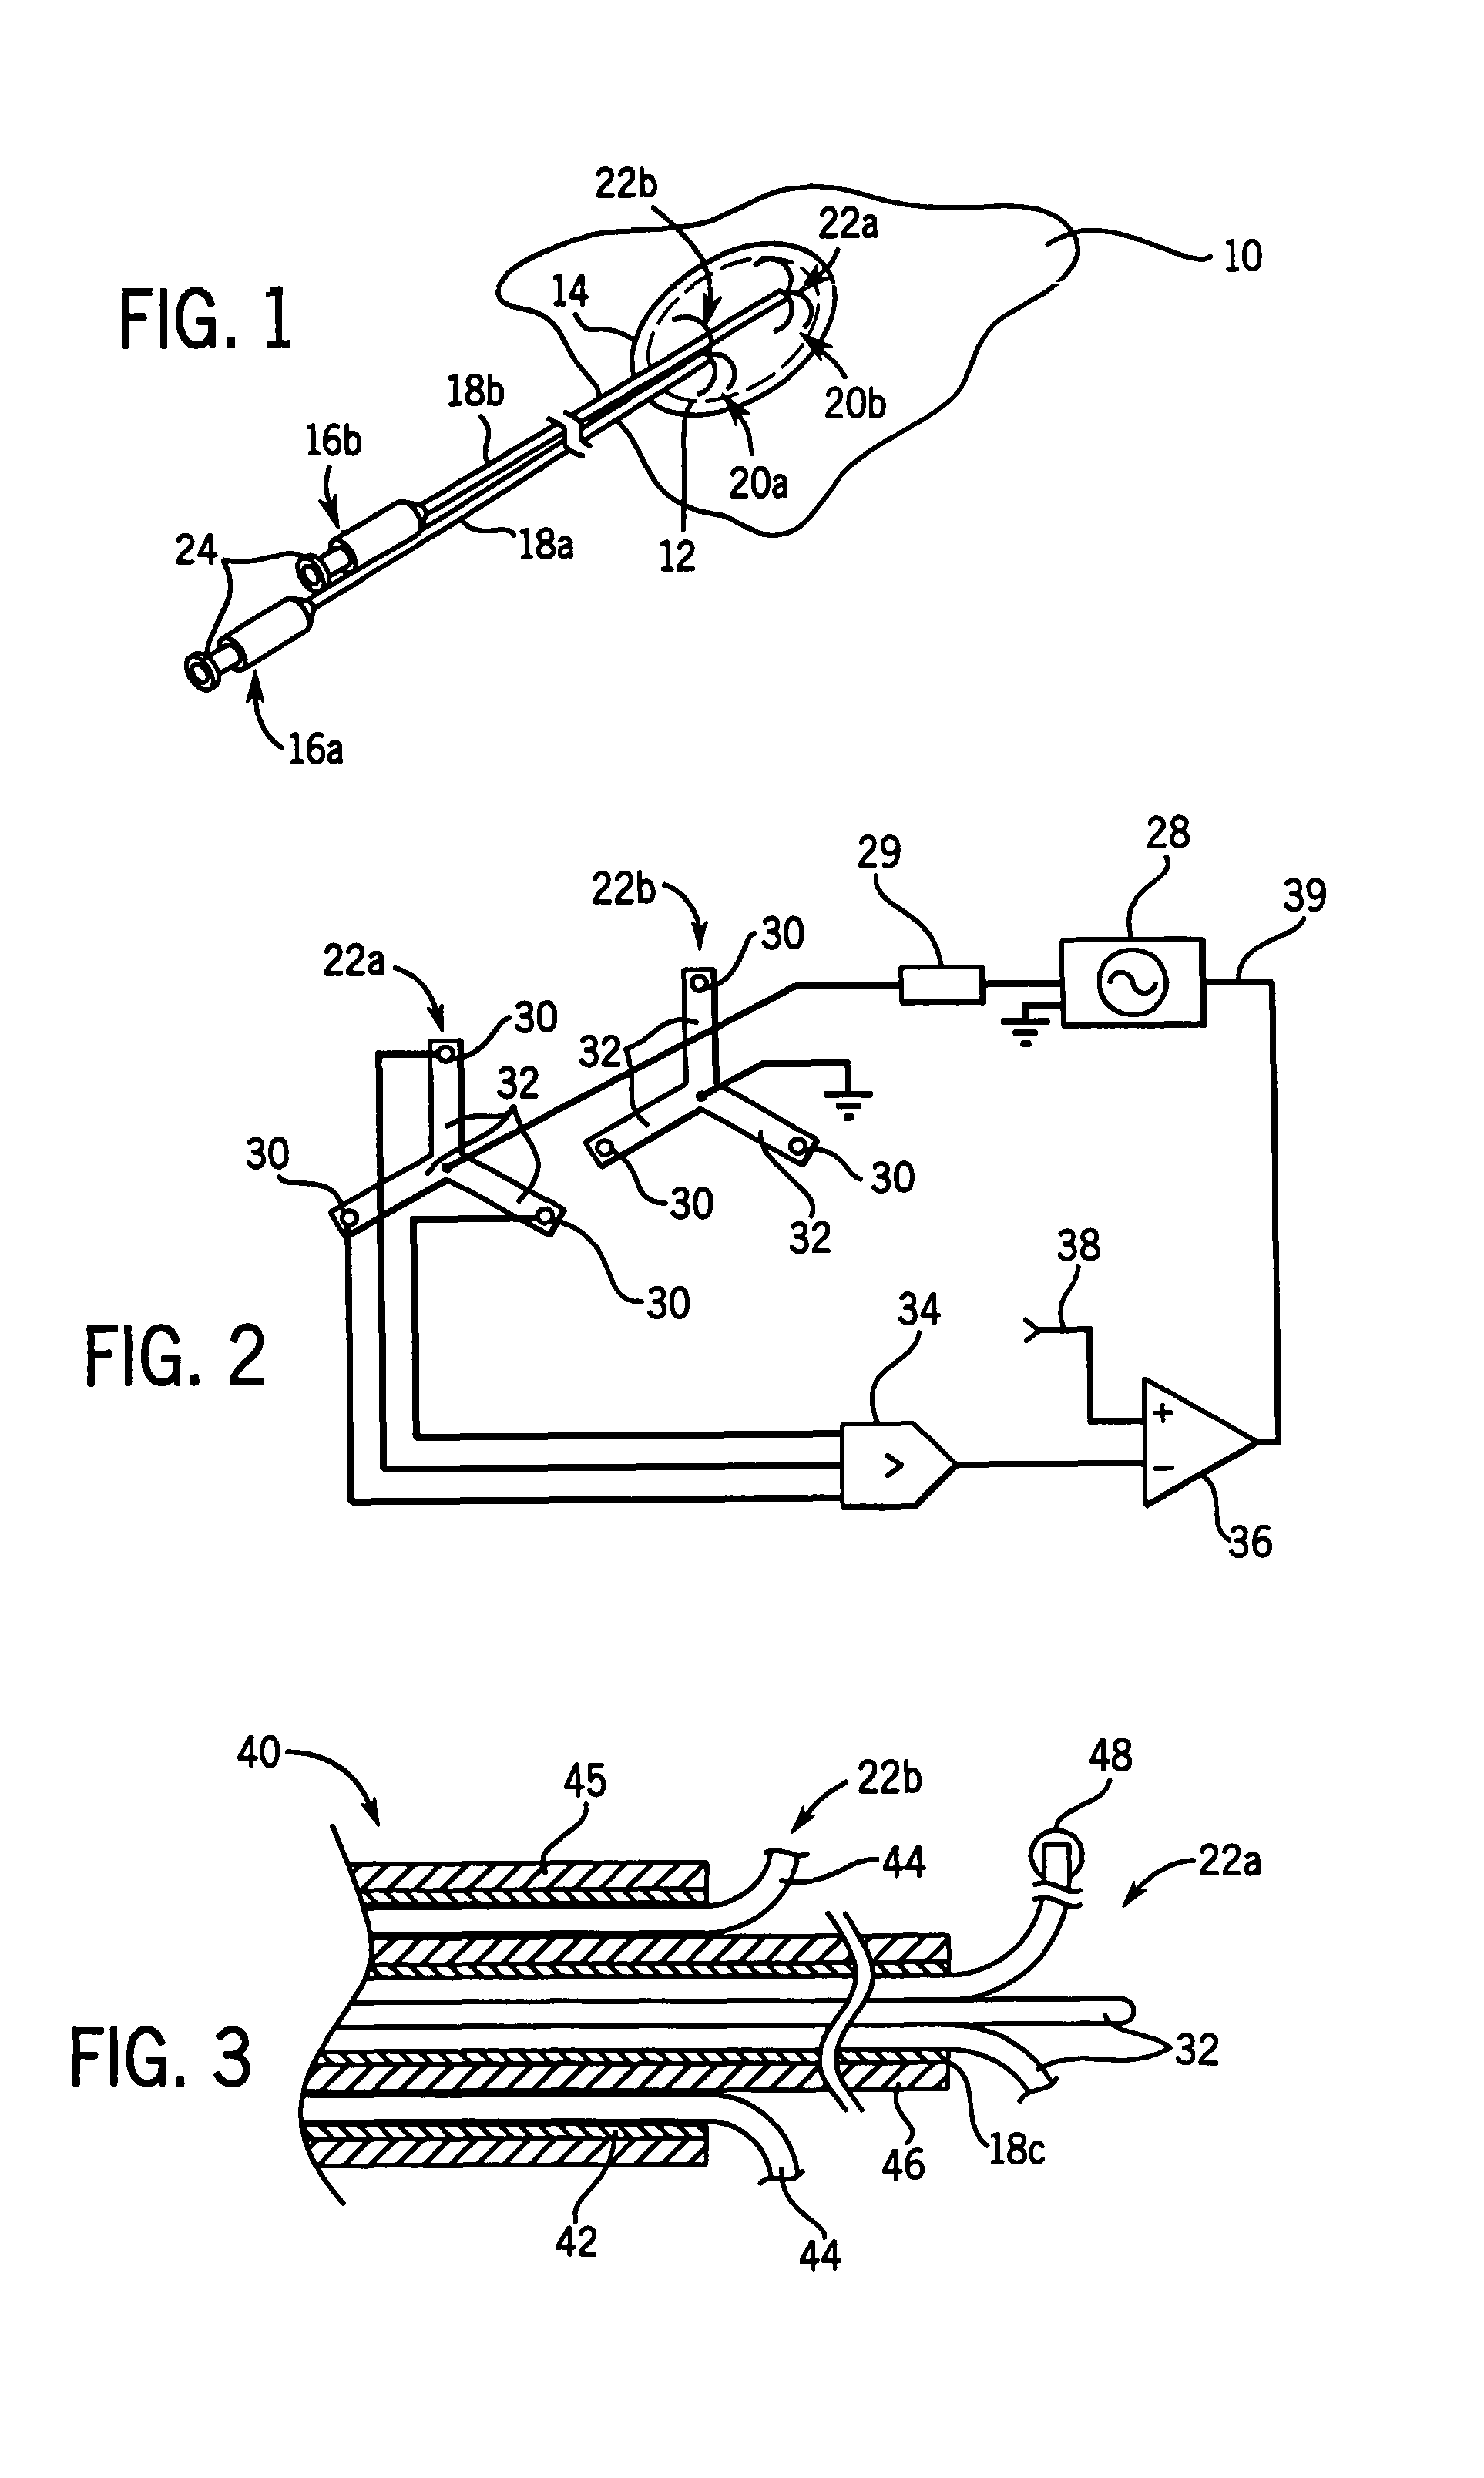 Radio-frequency ablation system and method using multiple electrodes